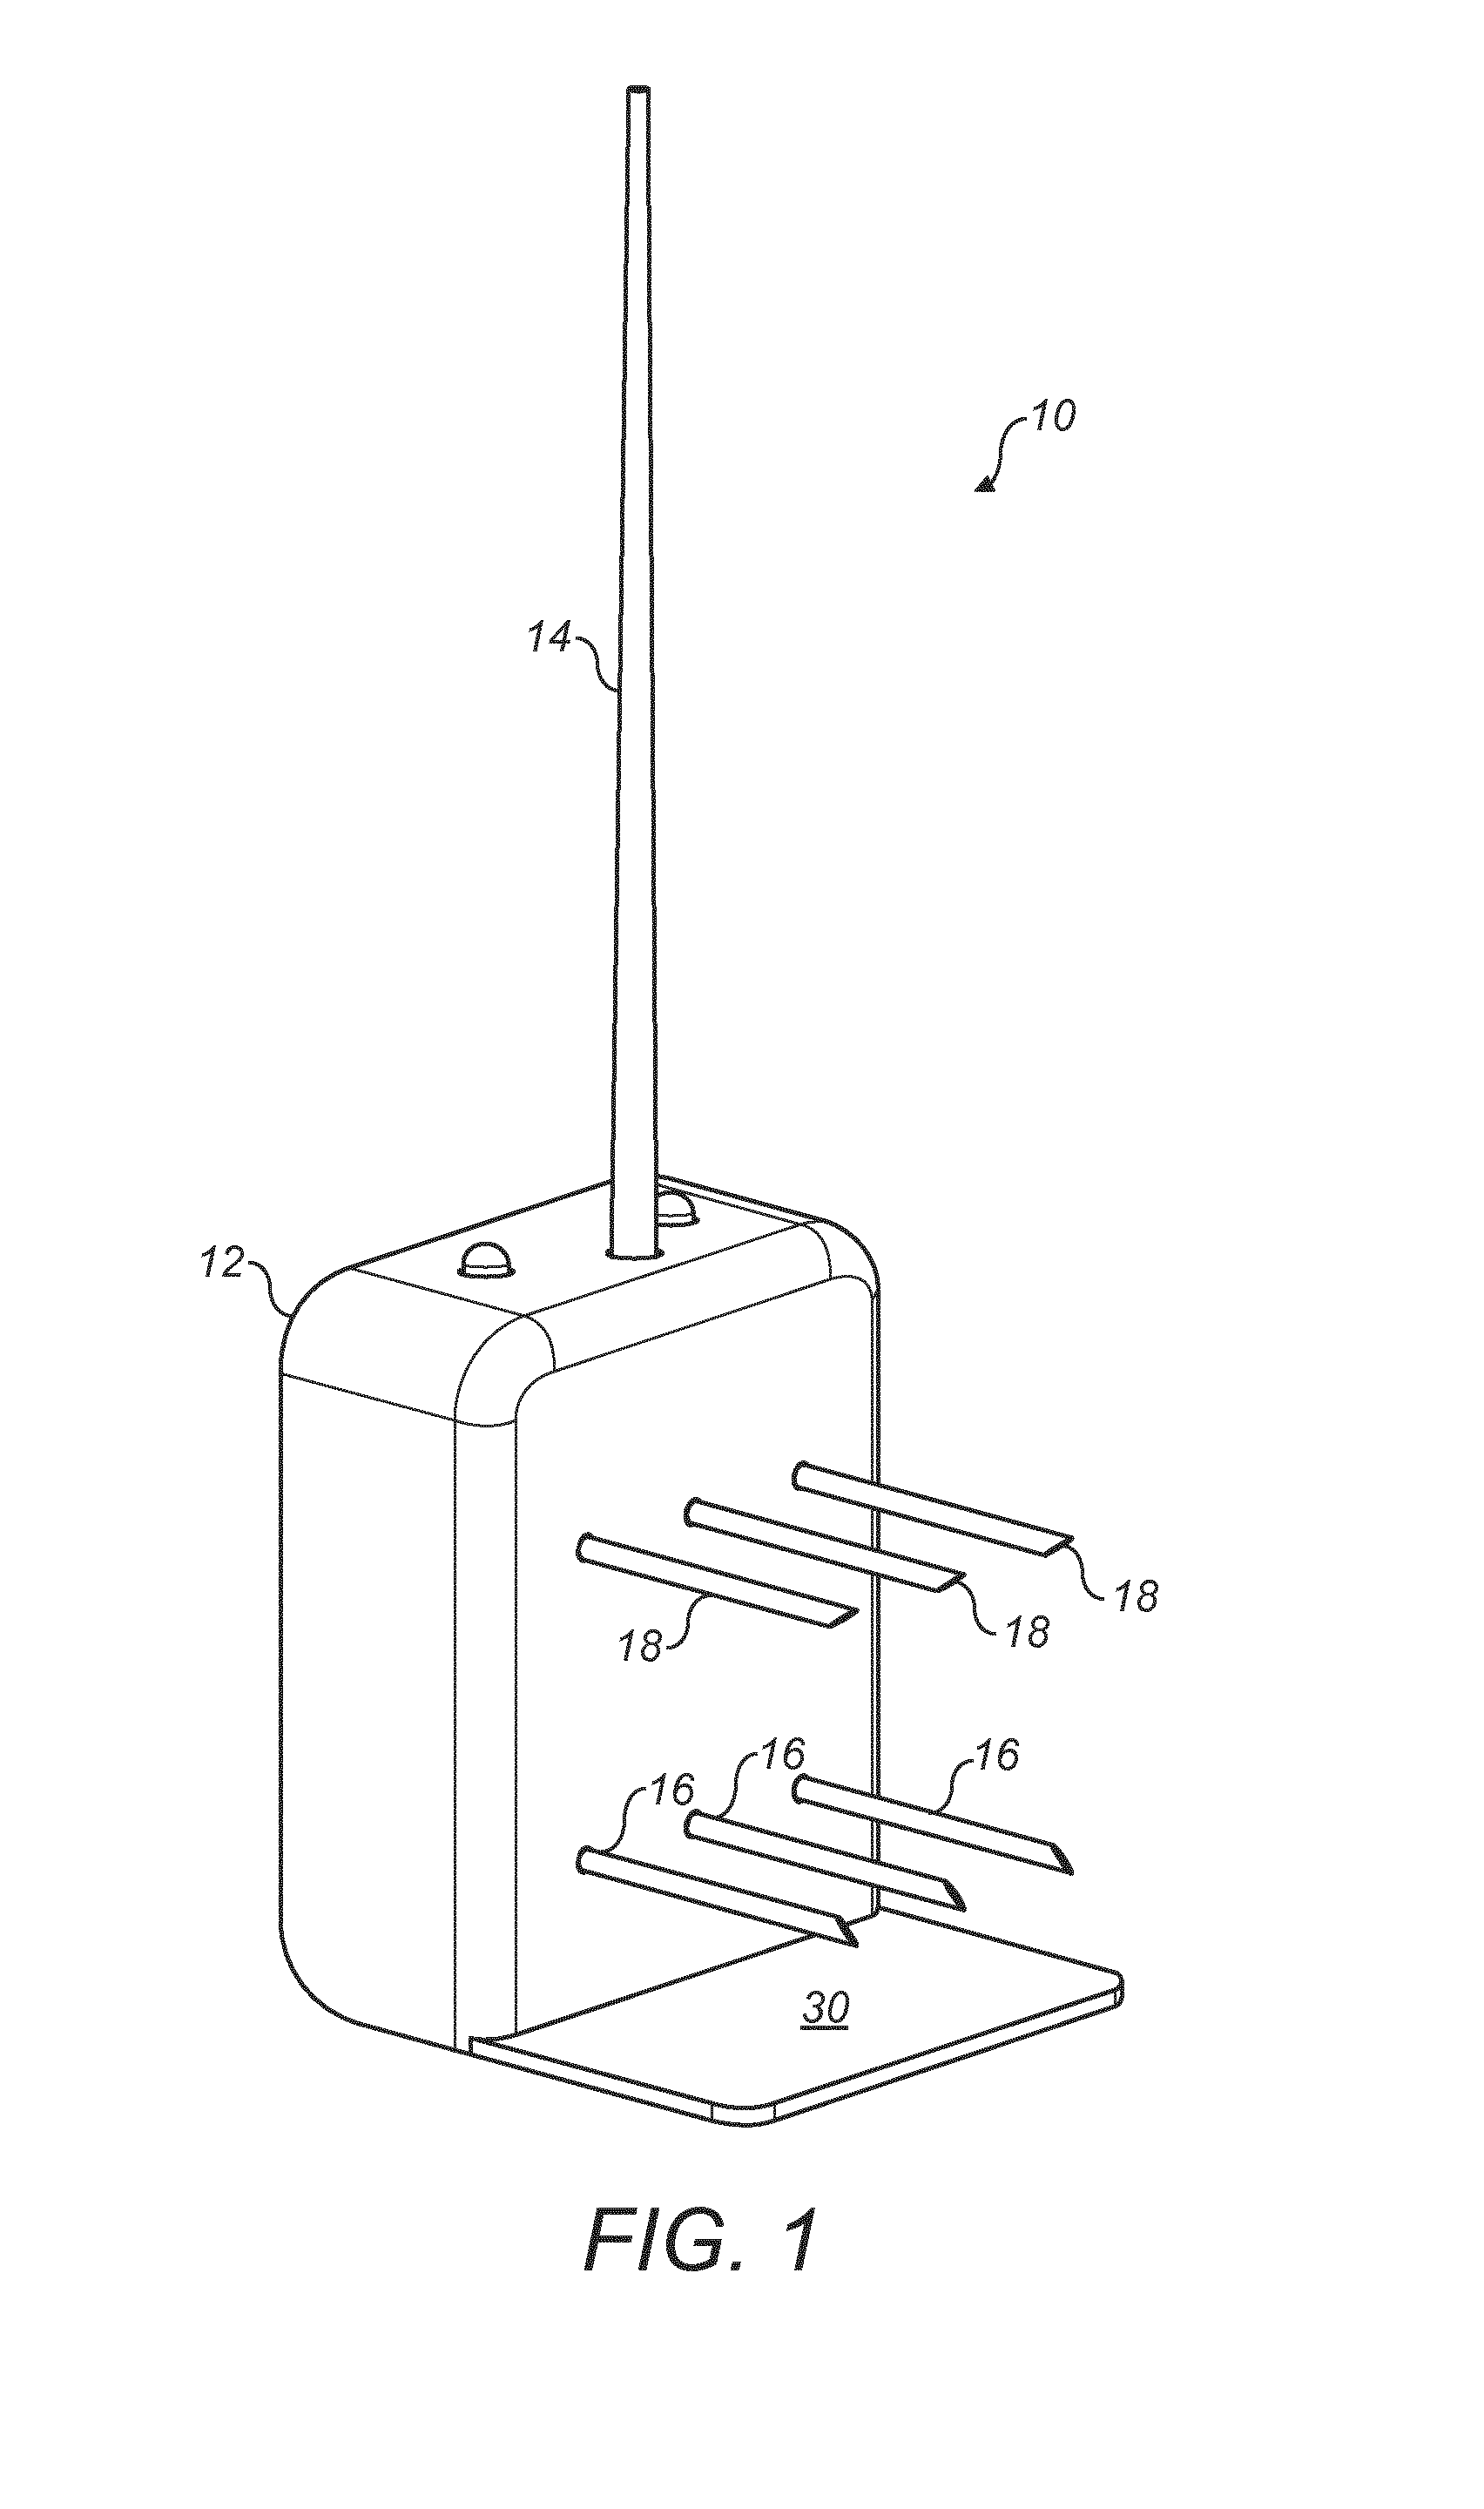 Device and method for measuring plant growth conditions